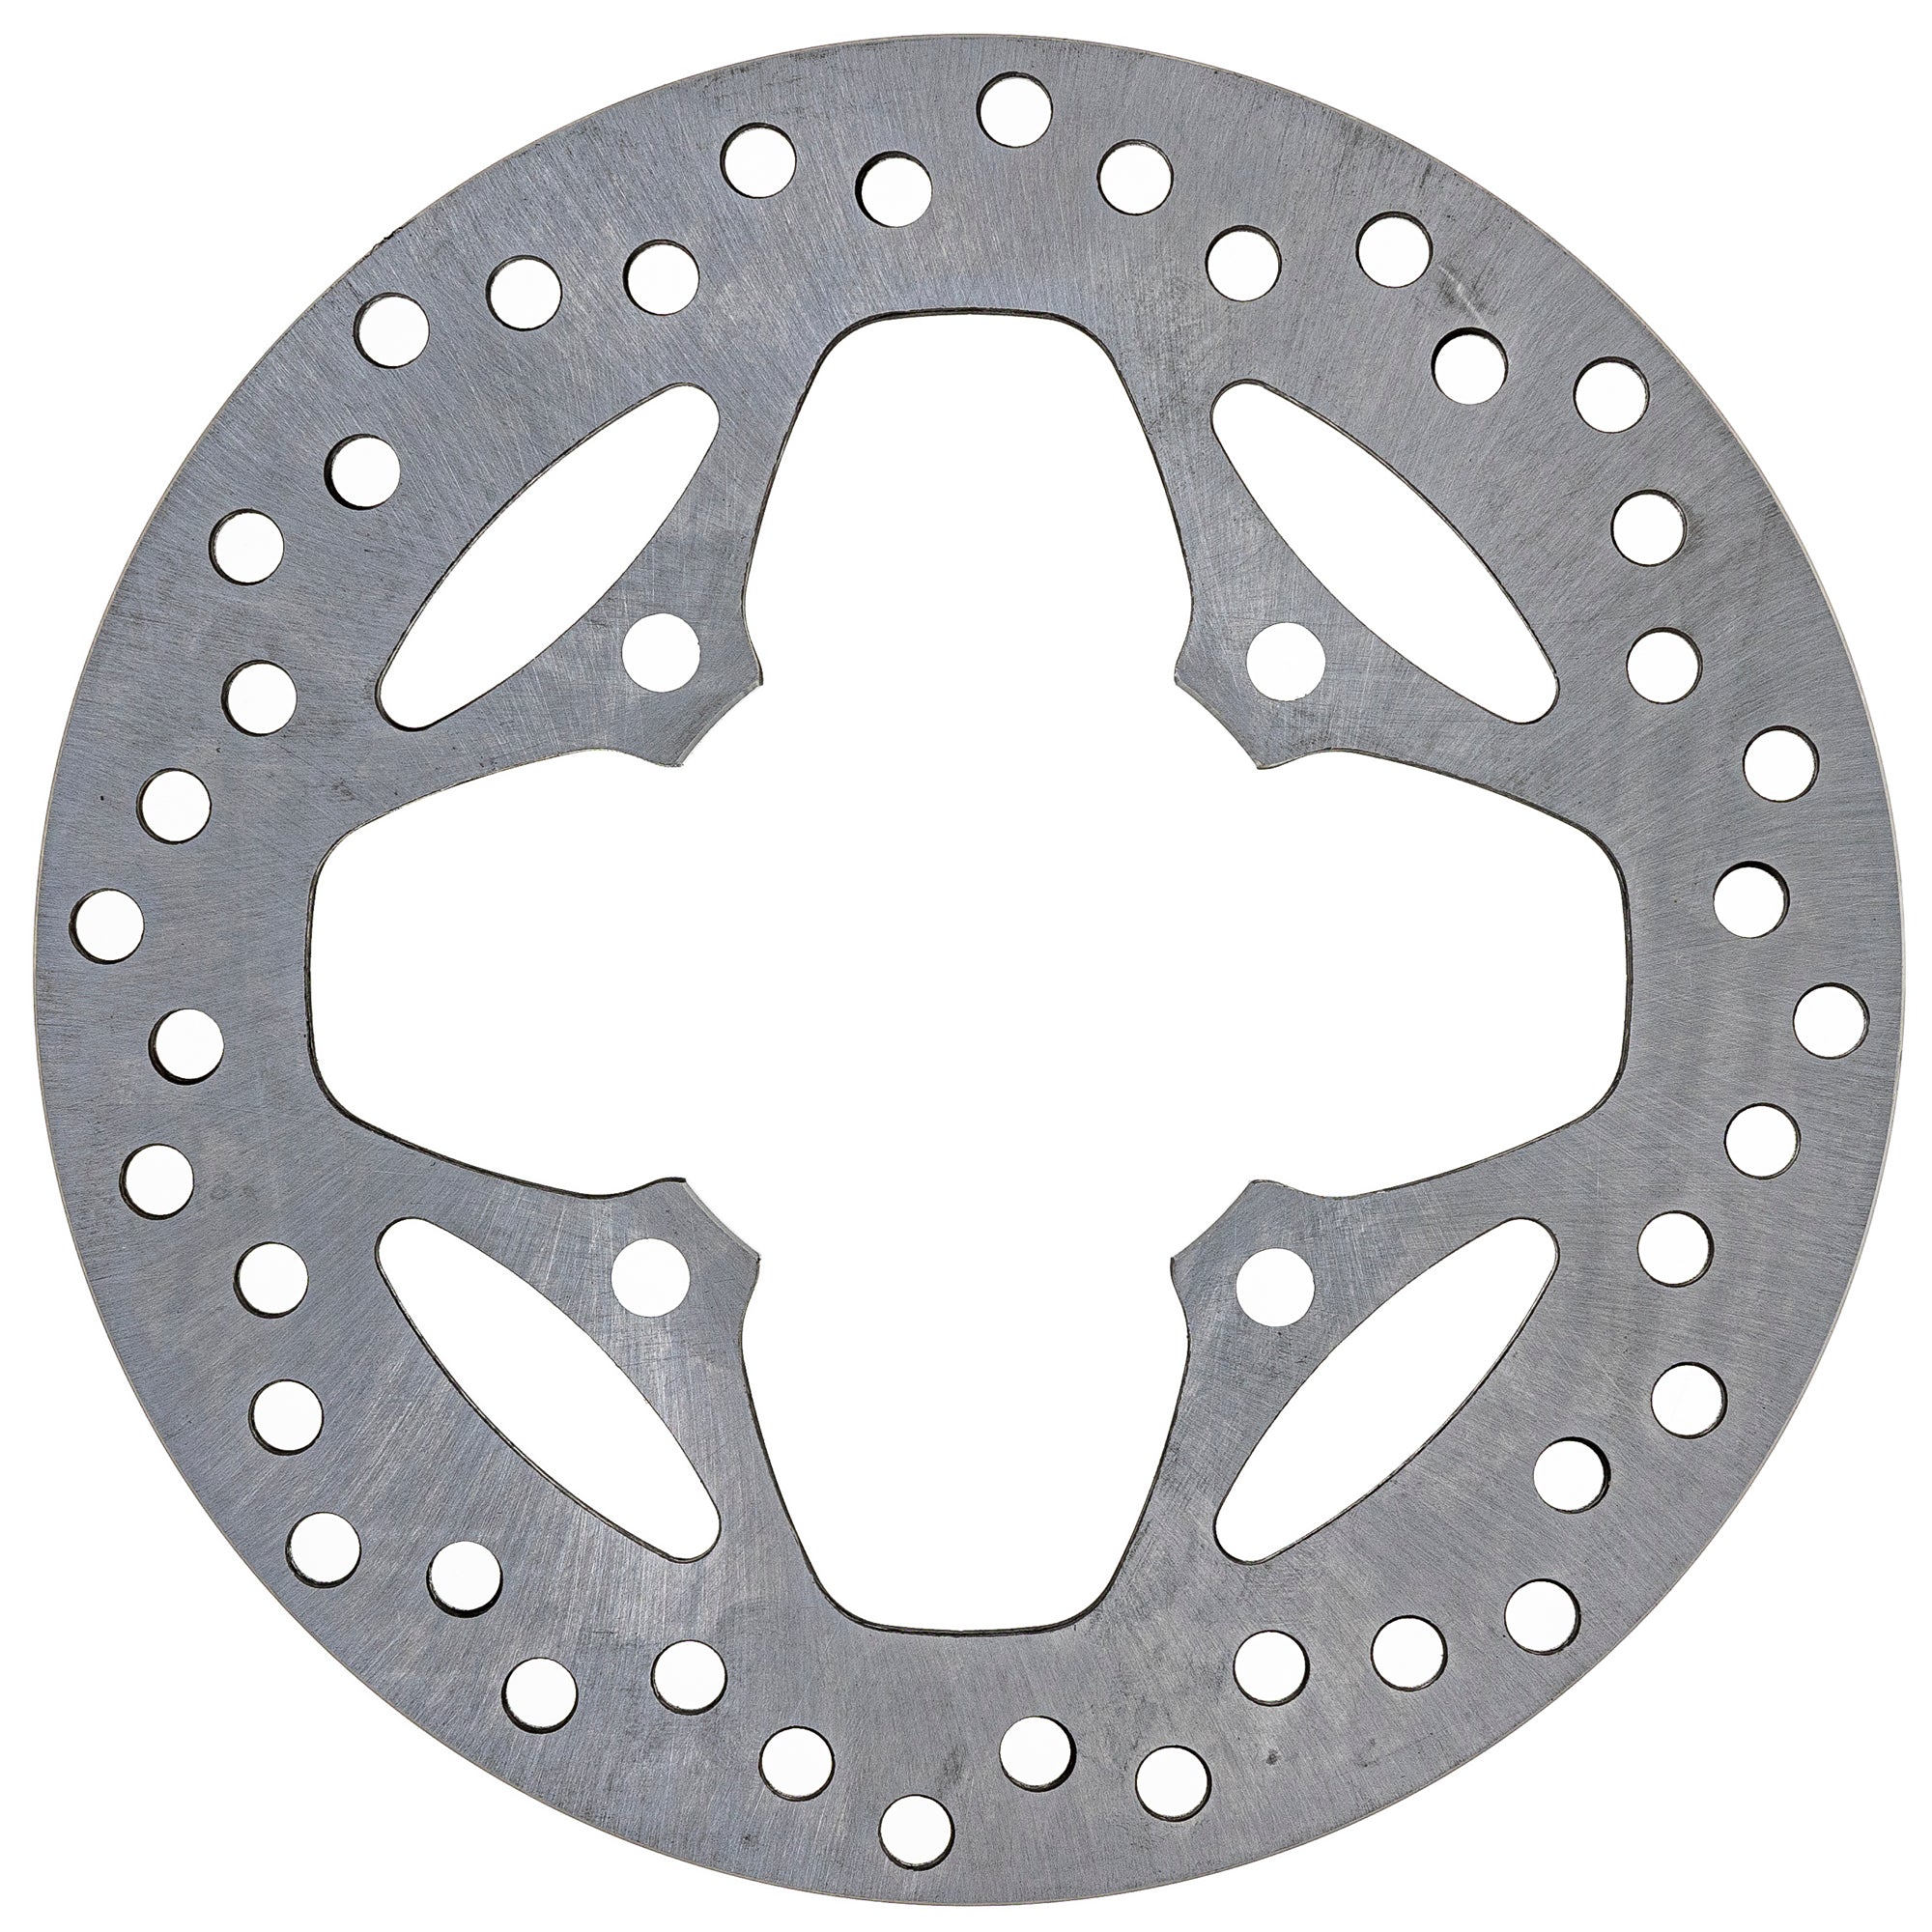 Brake Rotor for zOTHER BRP Can-Am Ski-Doo Sea-Doo Traxter Quest NICHE 519-CRT2554R